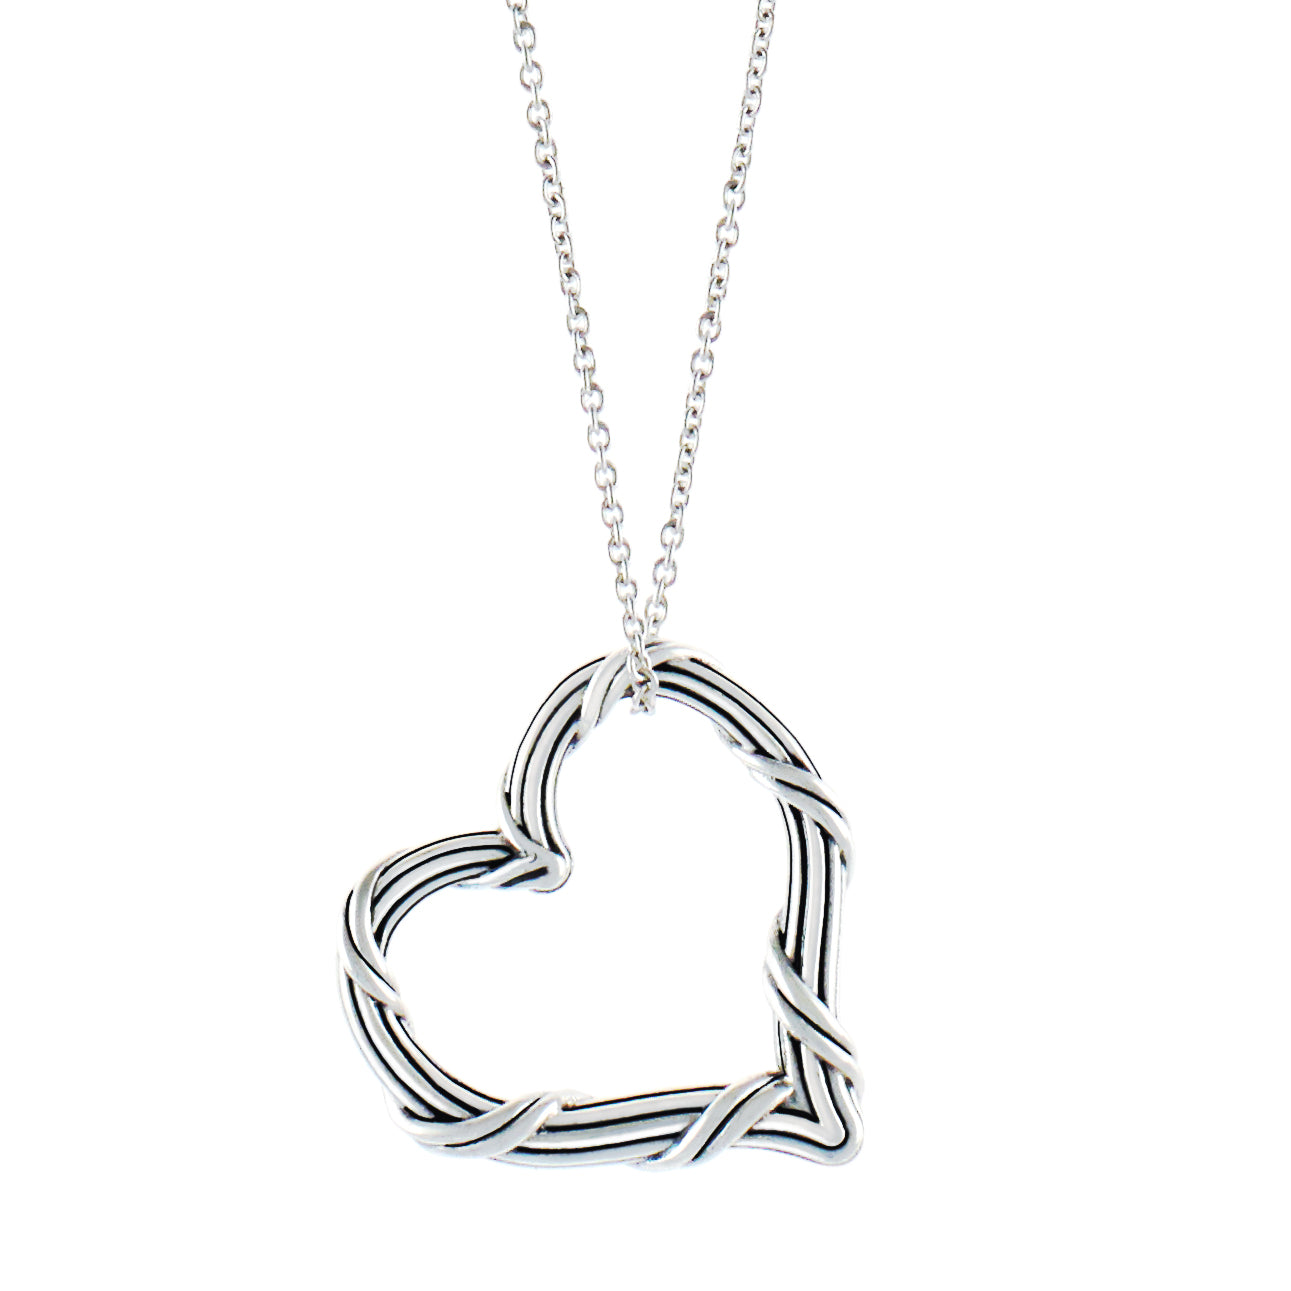 Signature Classic Heart Necklace in sterling silver